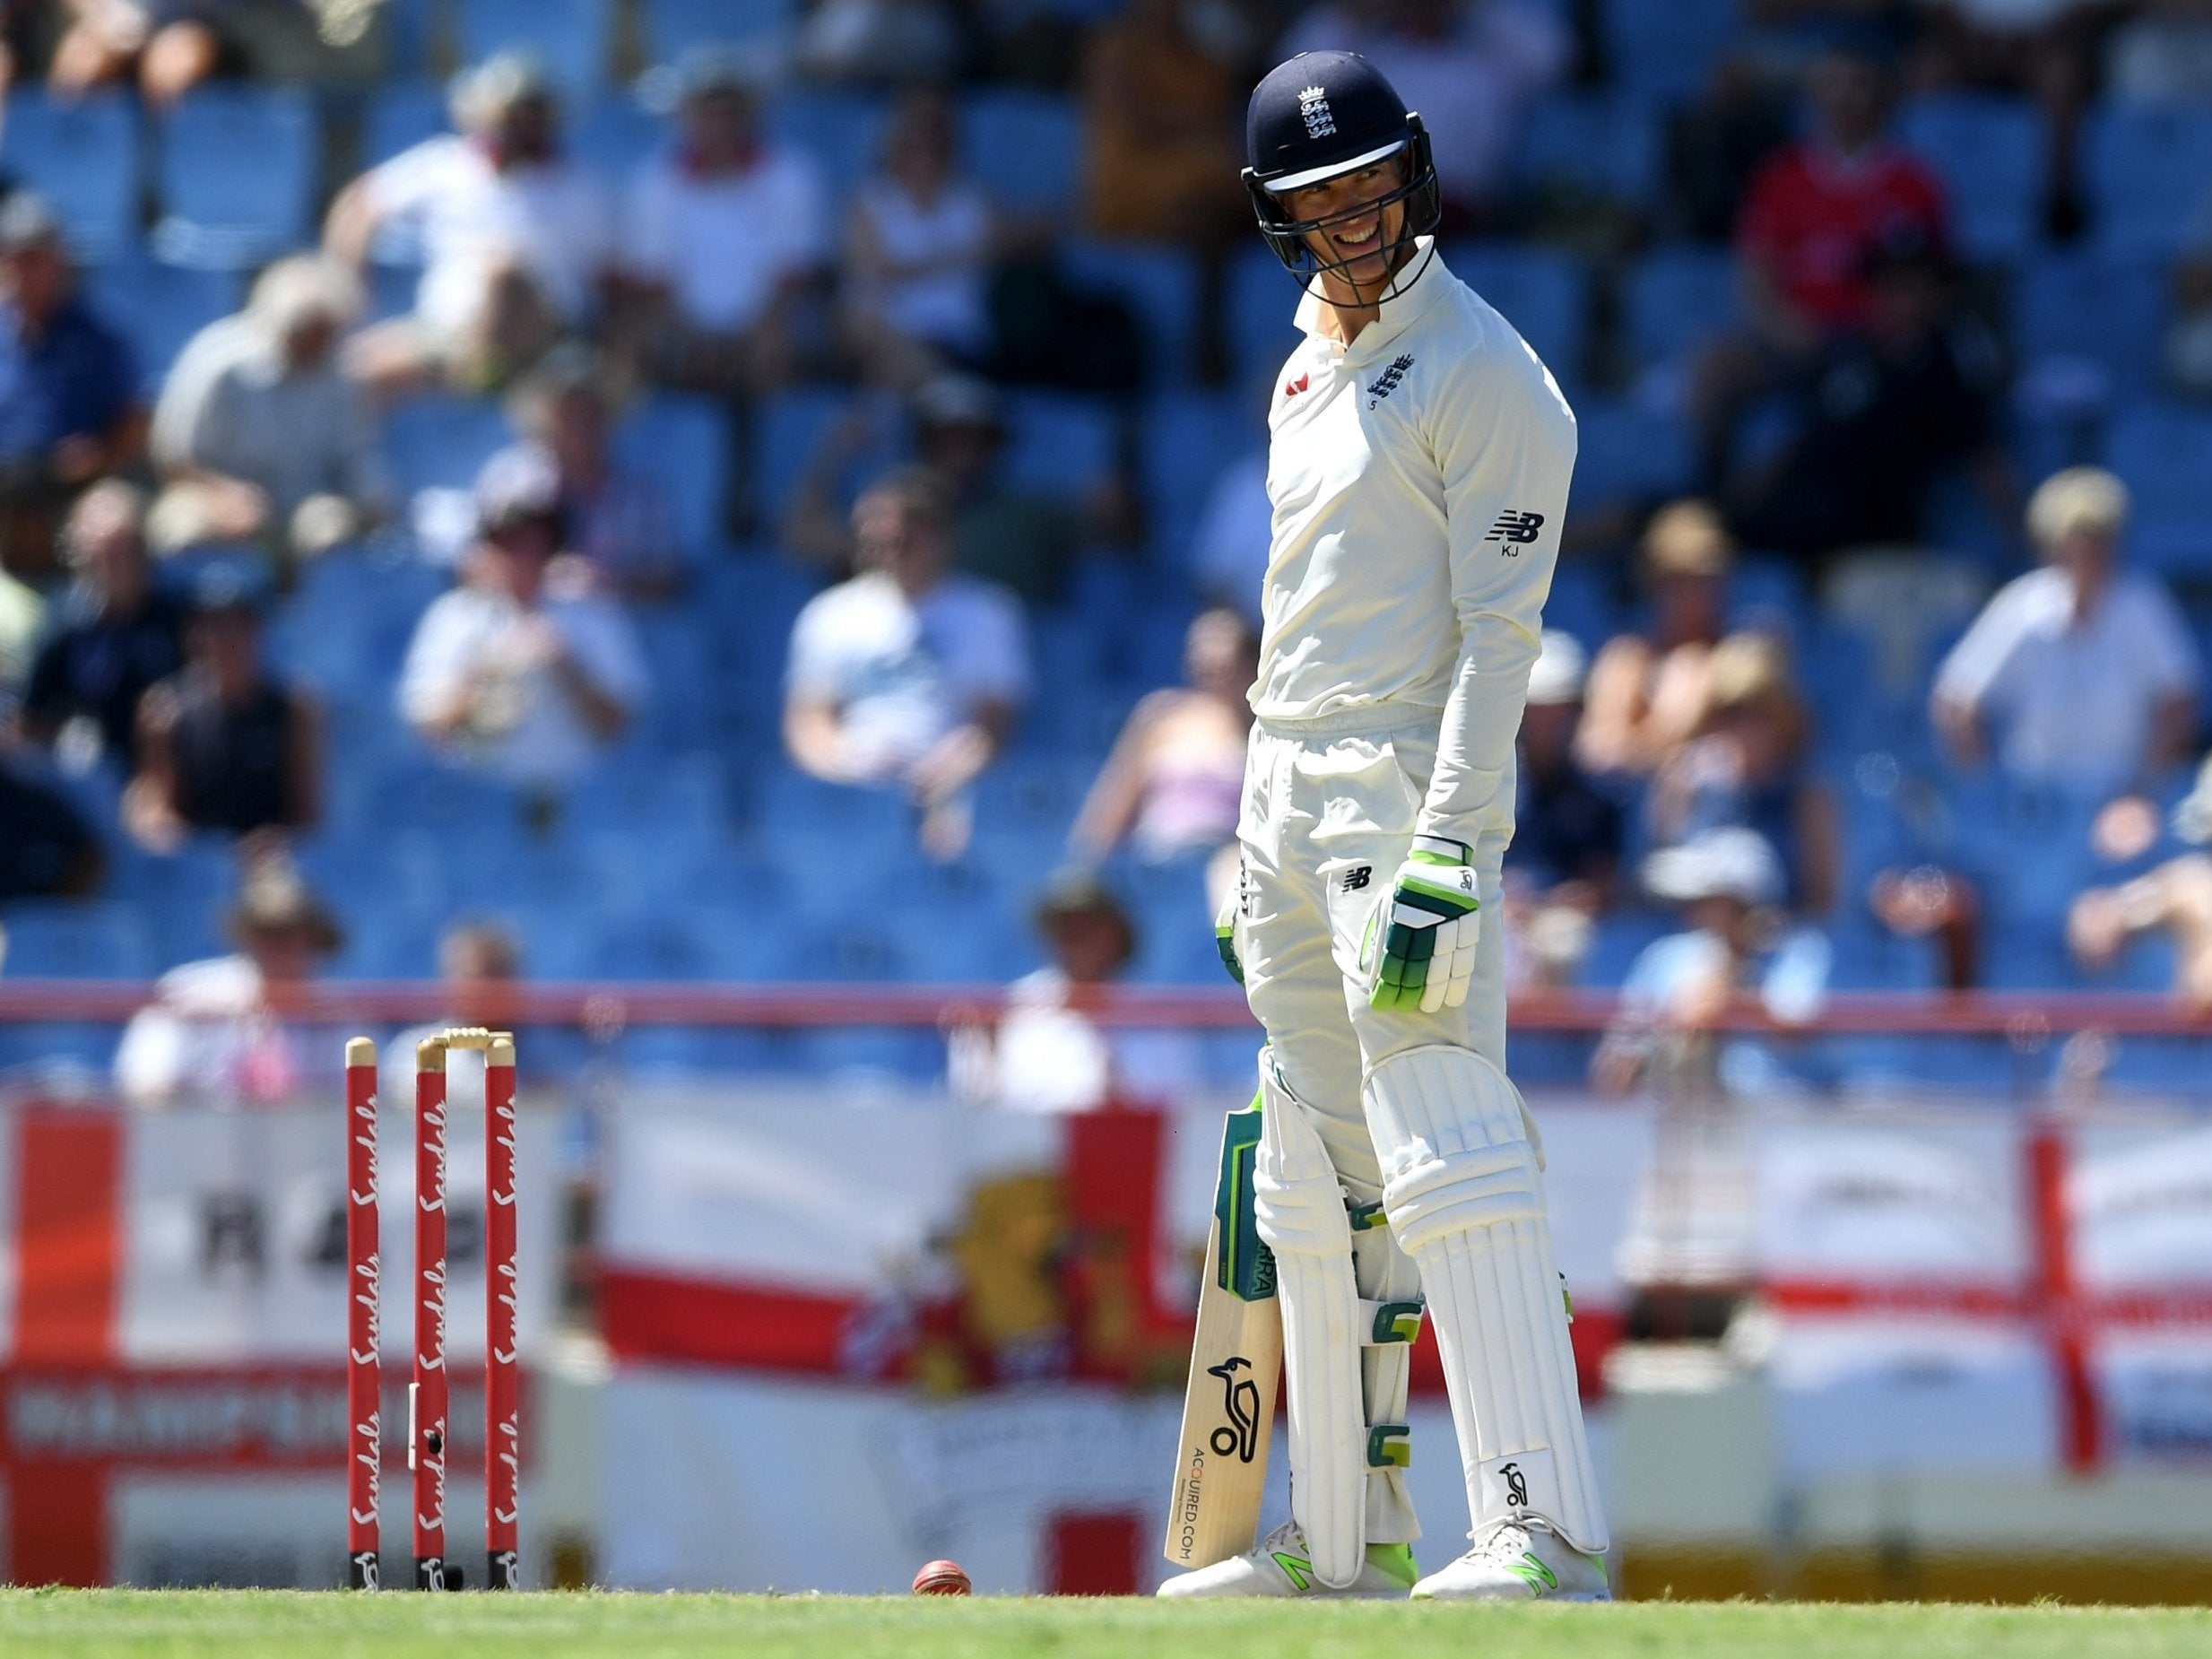 Jennings was dropped for the second Test against Sri Lanka